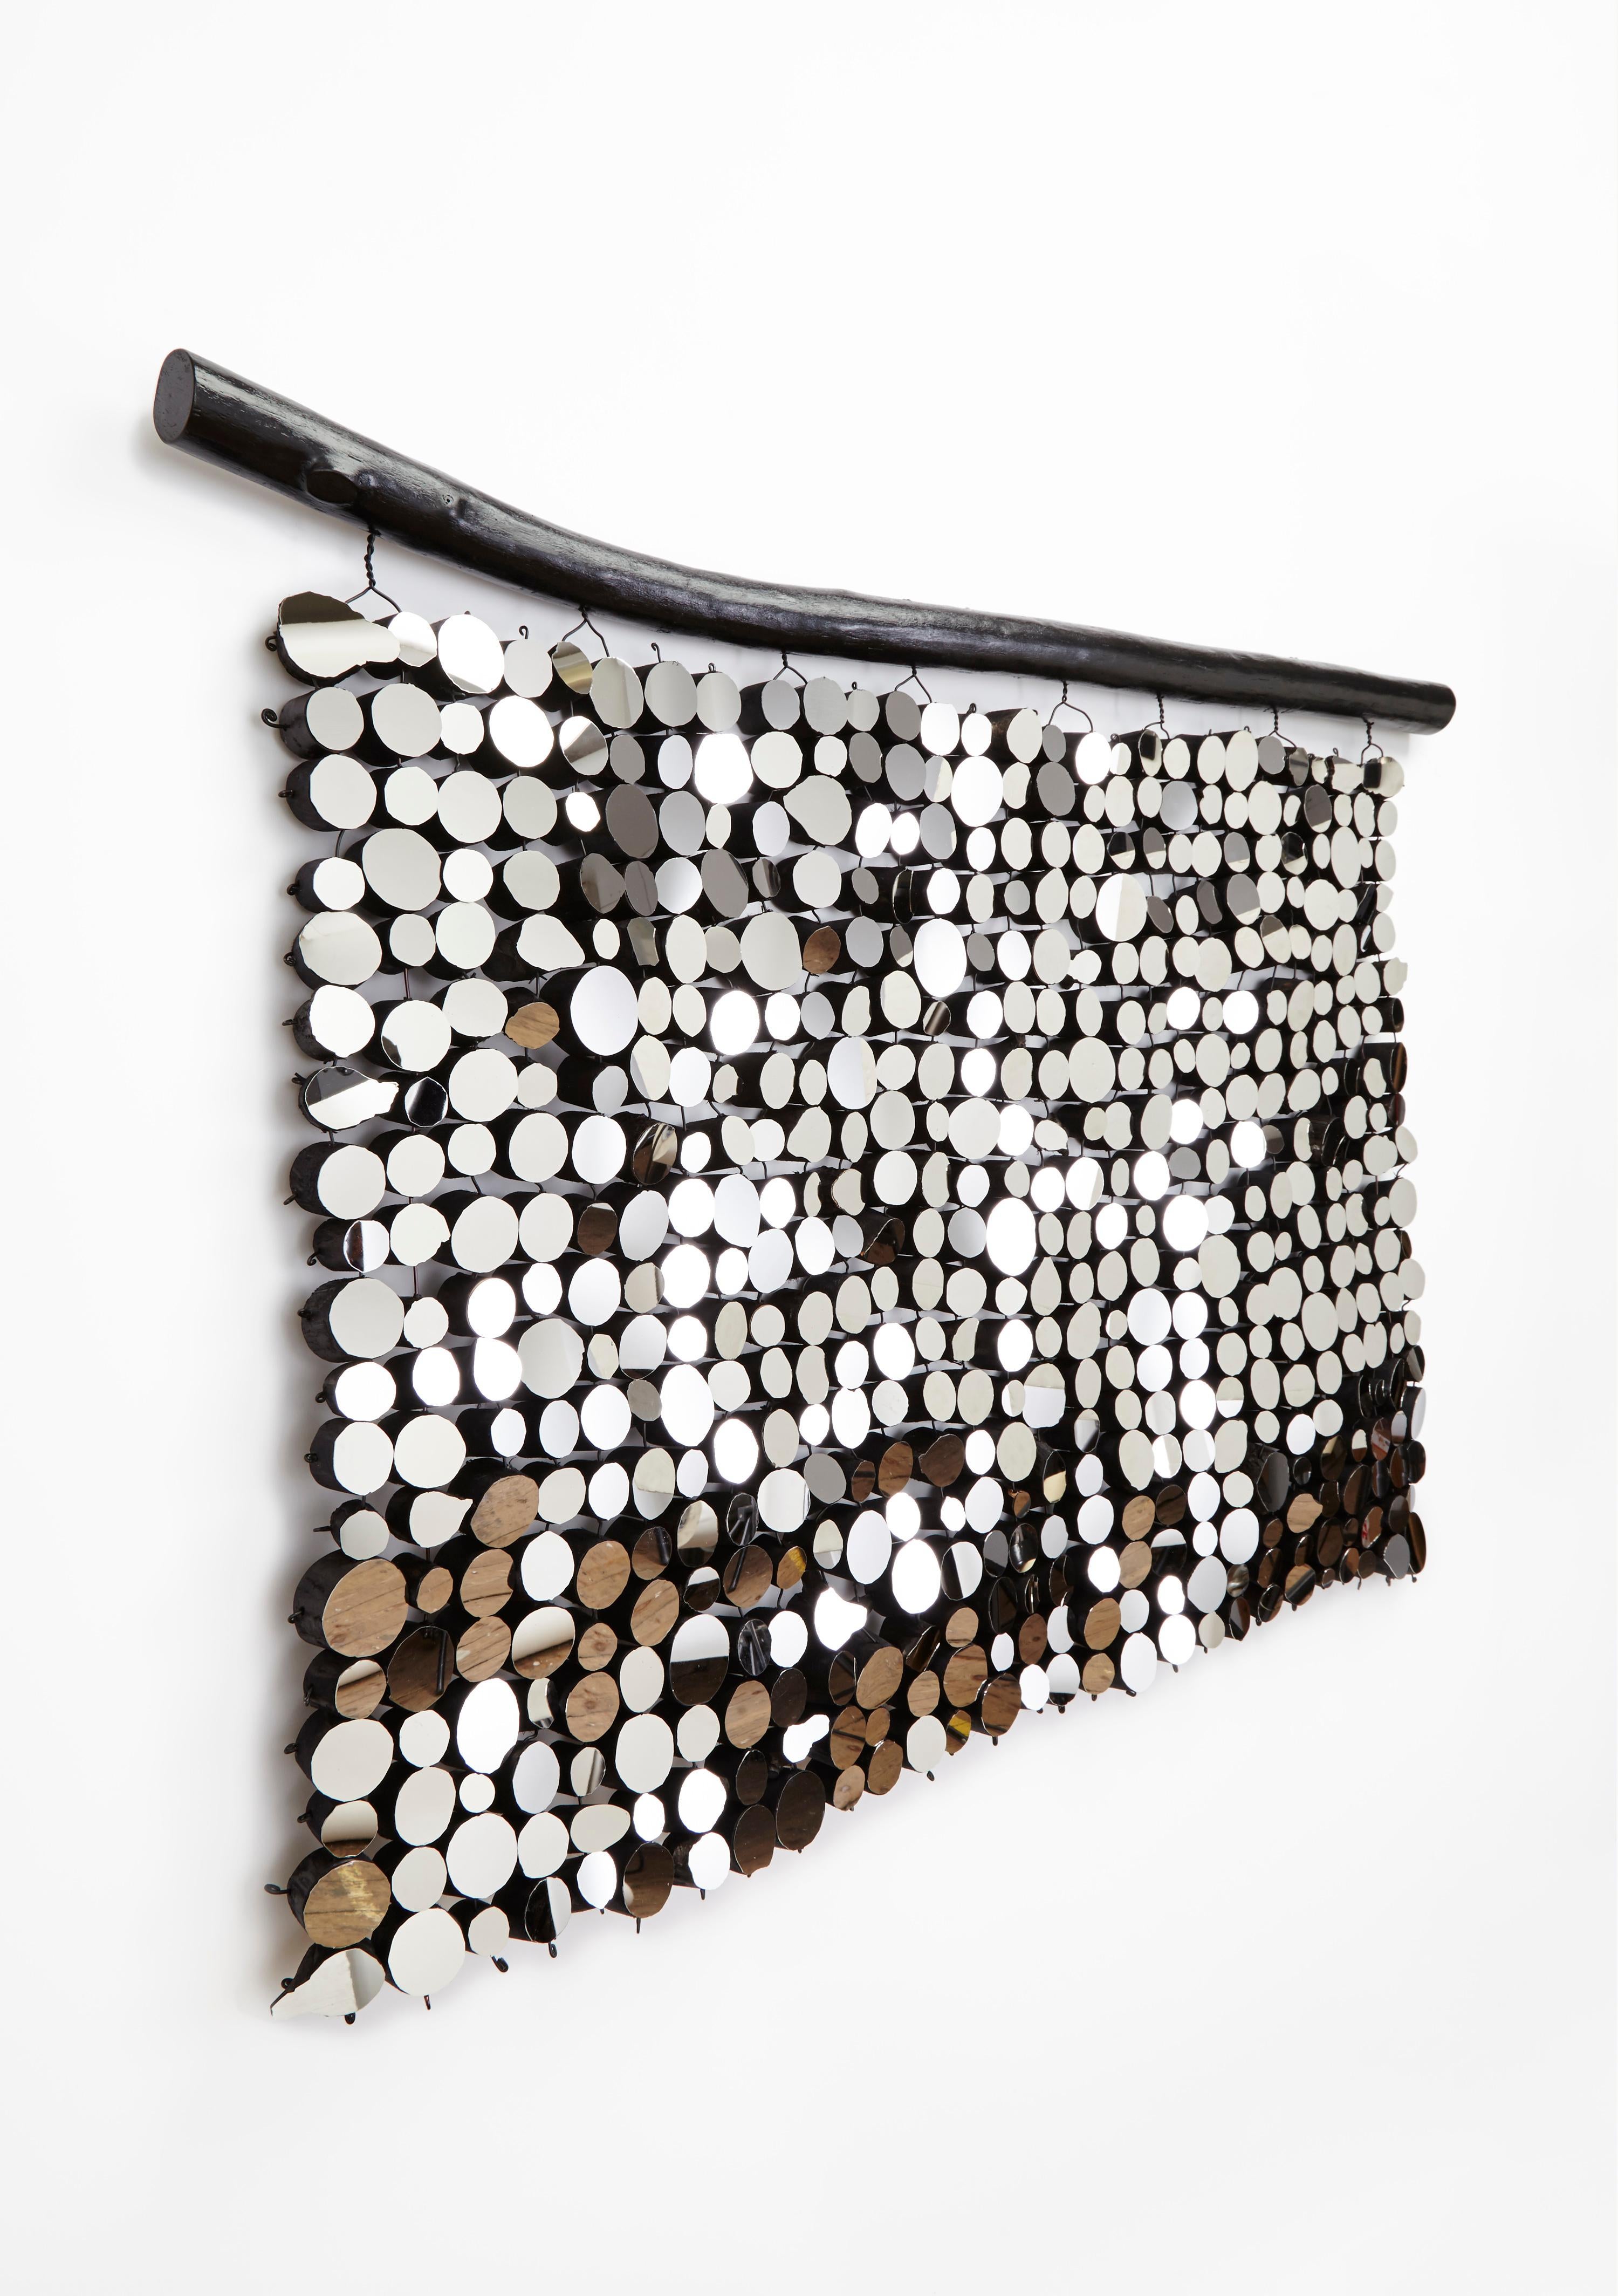 Landscape Mirror Tapestry: A Sculptural Wall Hanging of Mirrors and Fallen Wood - Sculpture by Lee Borthwick